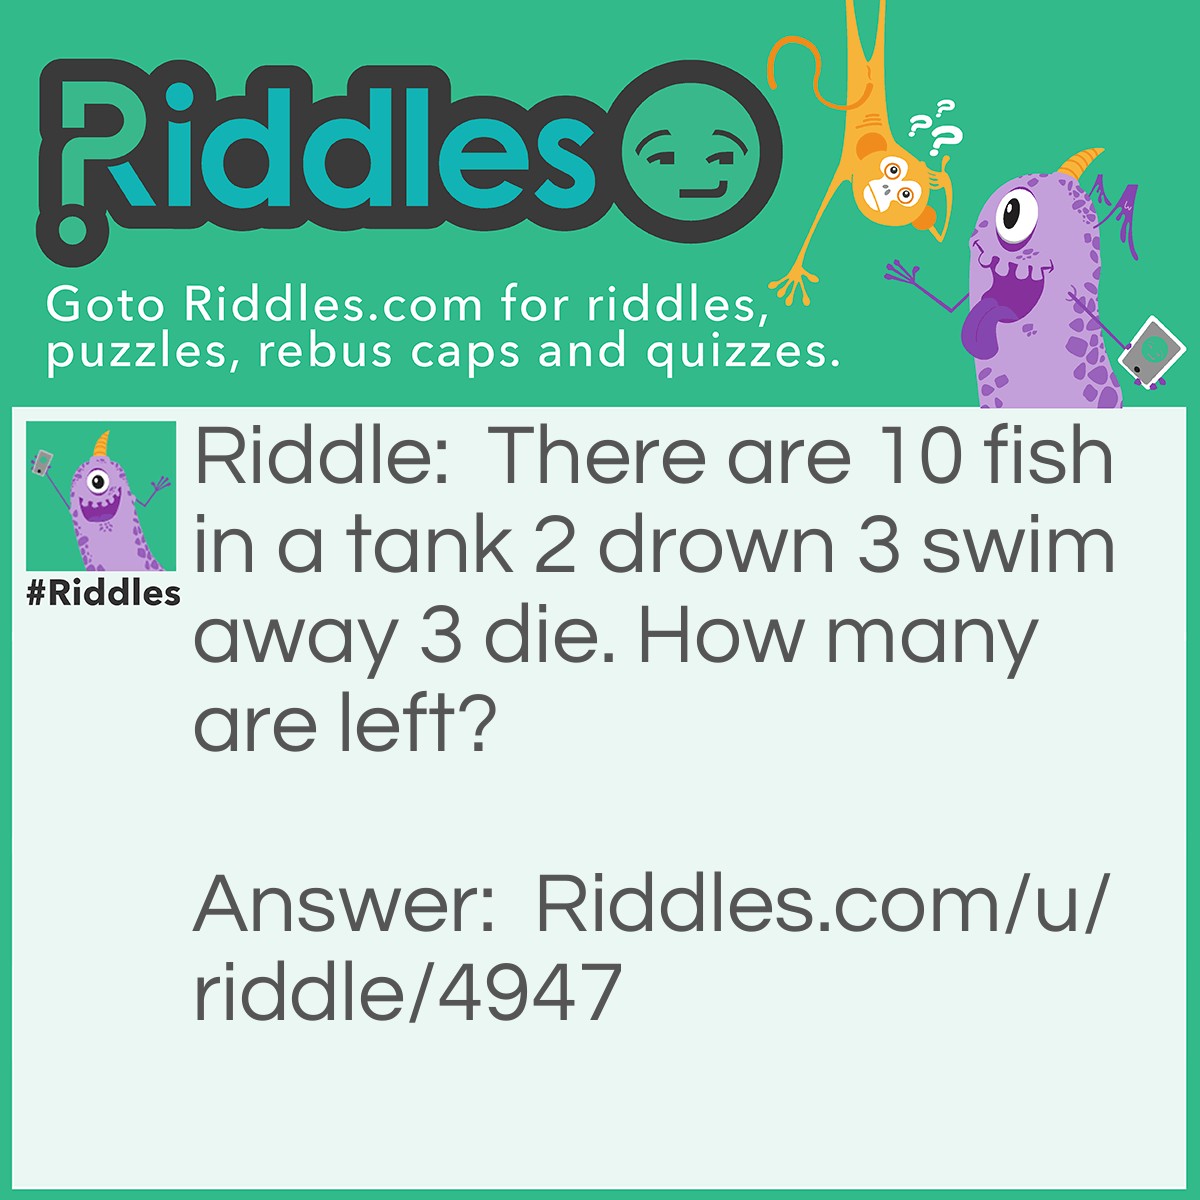 Riddle: There are 10 fish in a tank 2 drown 3 swim away 3 die. How many are left? Answer: 10.